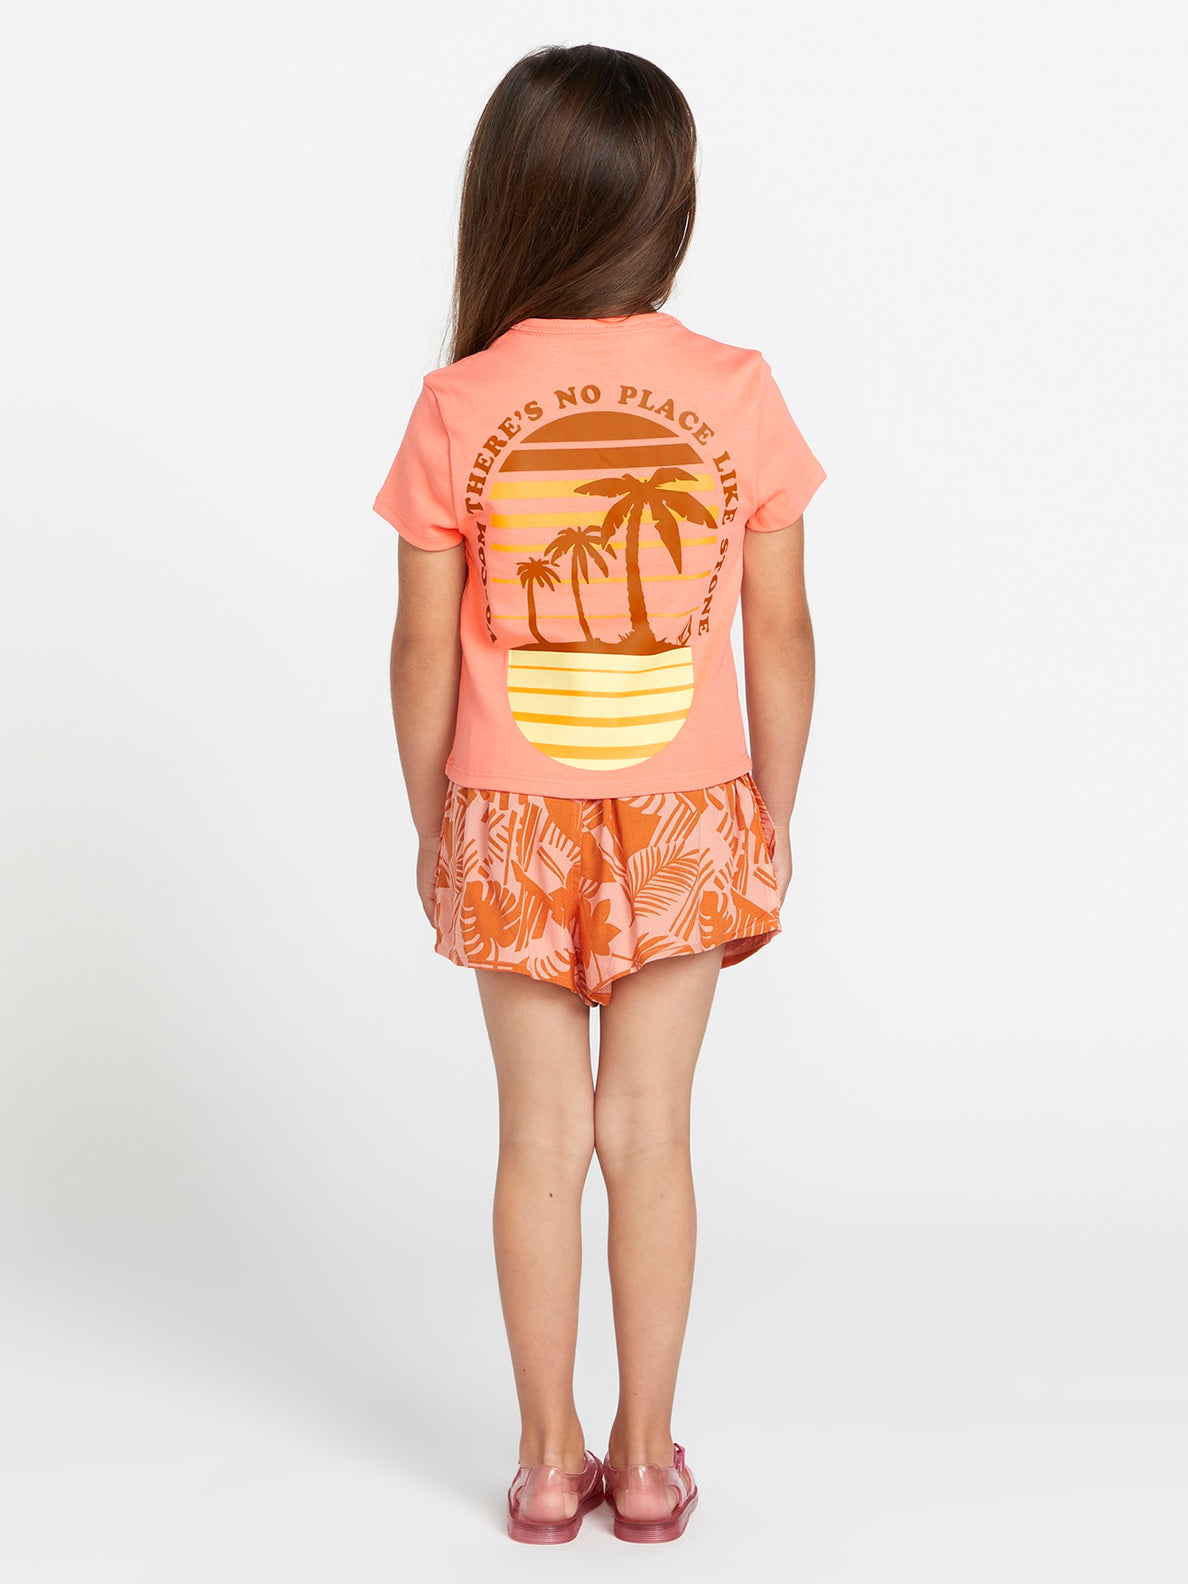 Girls Have A Clue Tee - Reef Pink